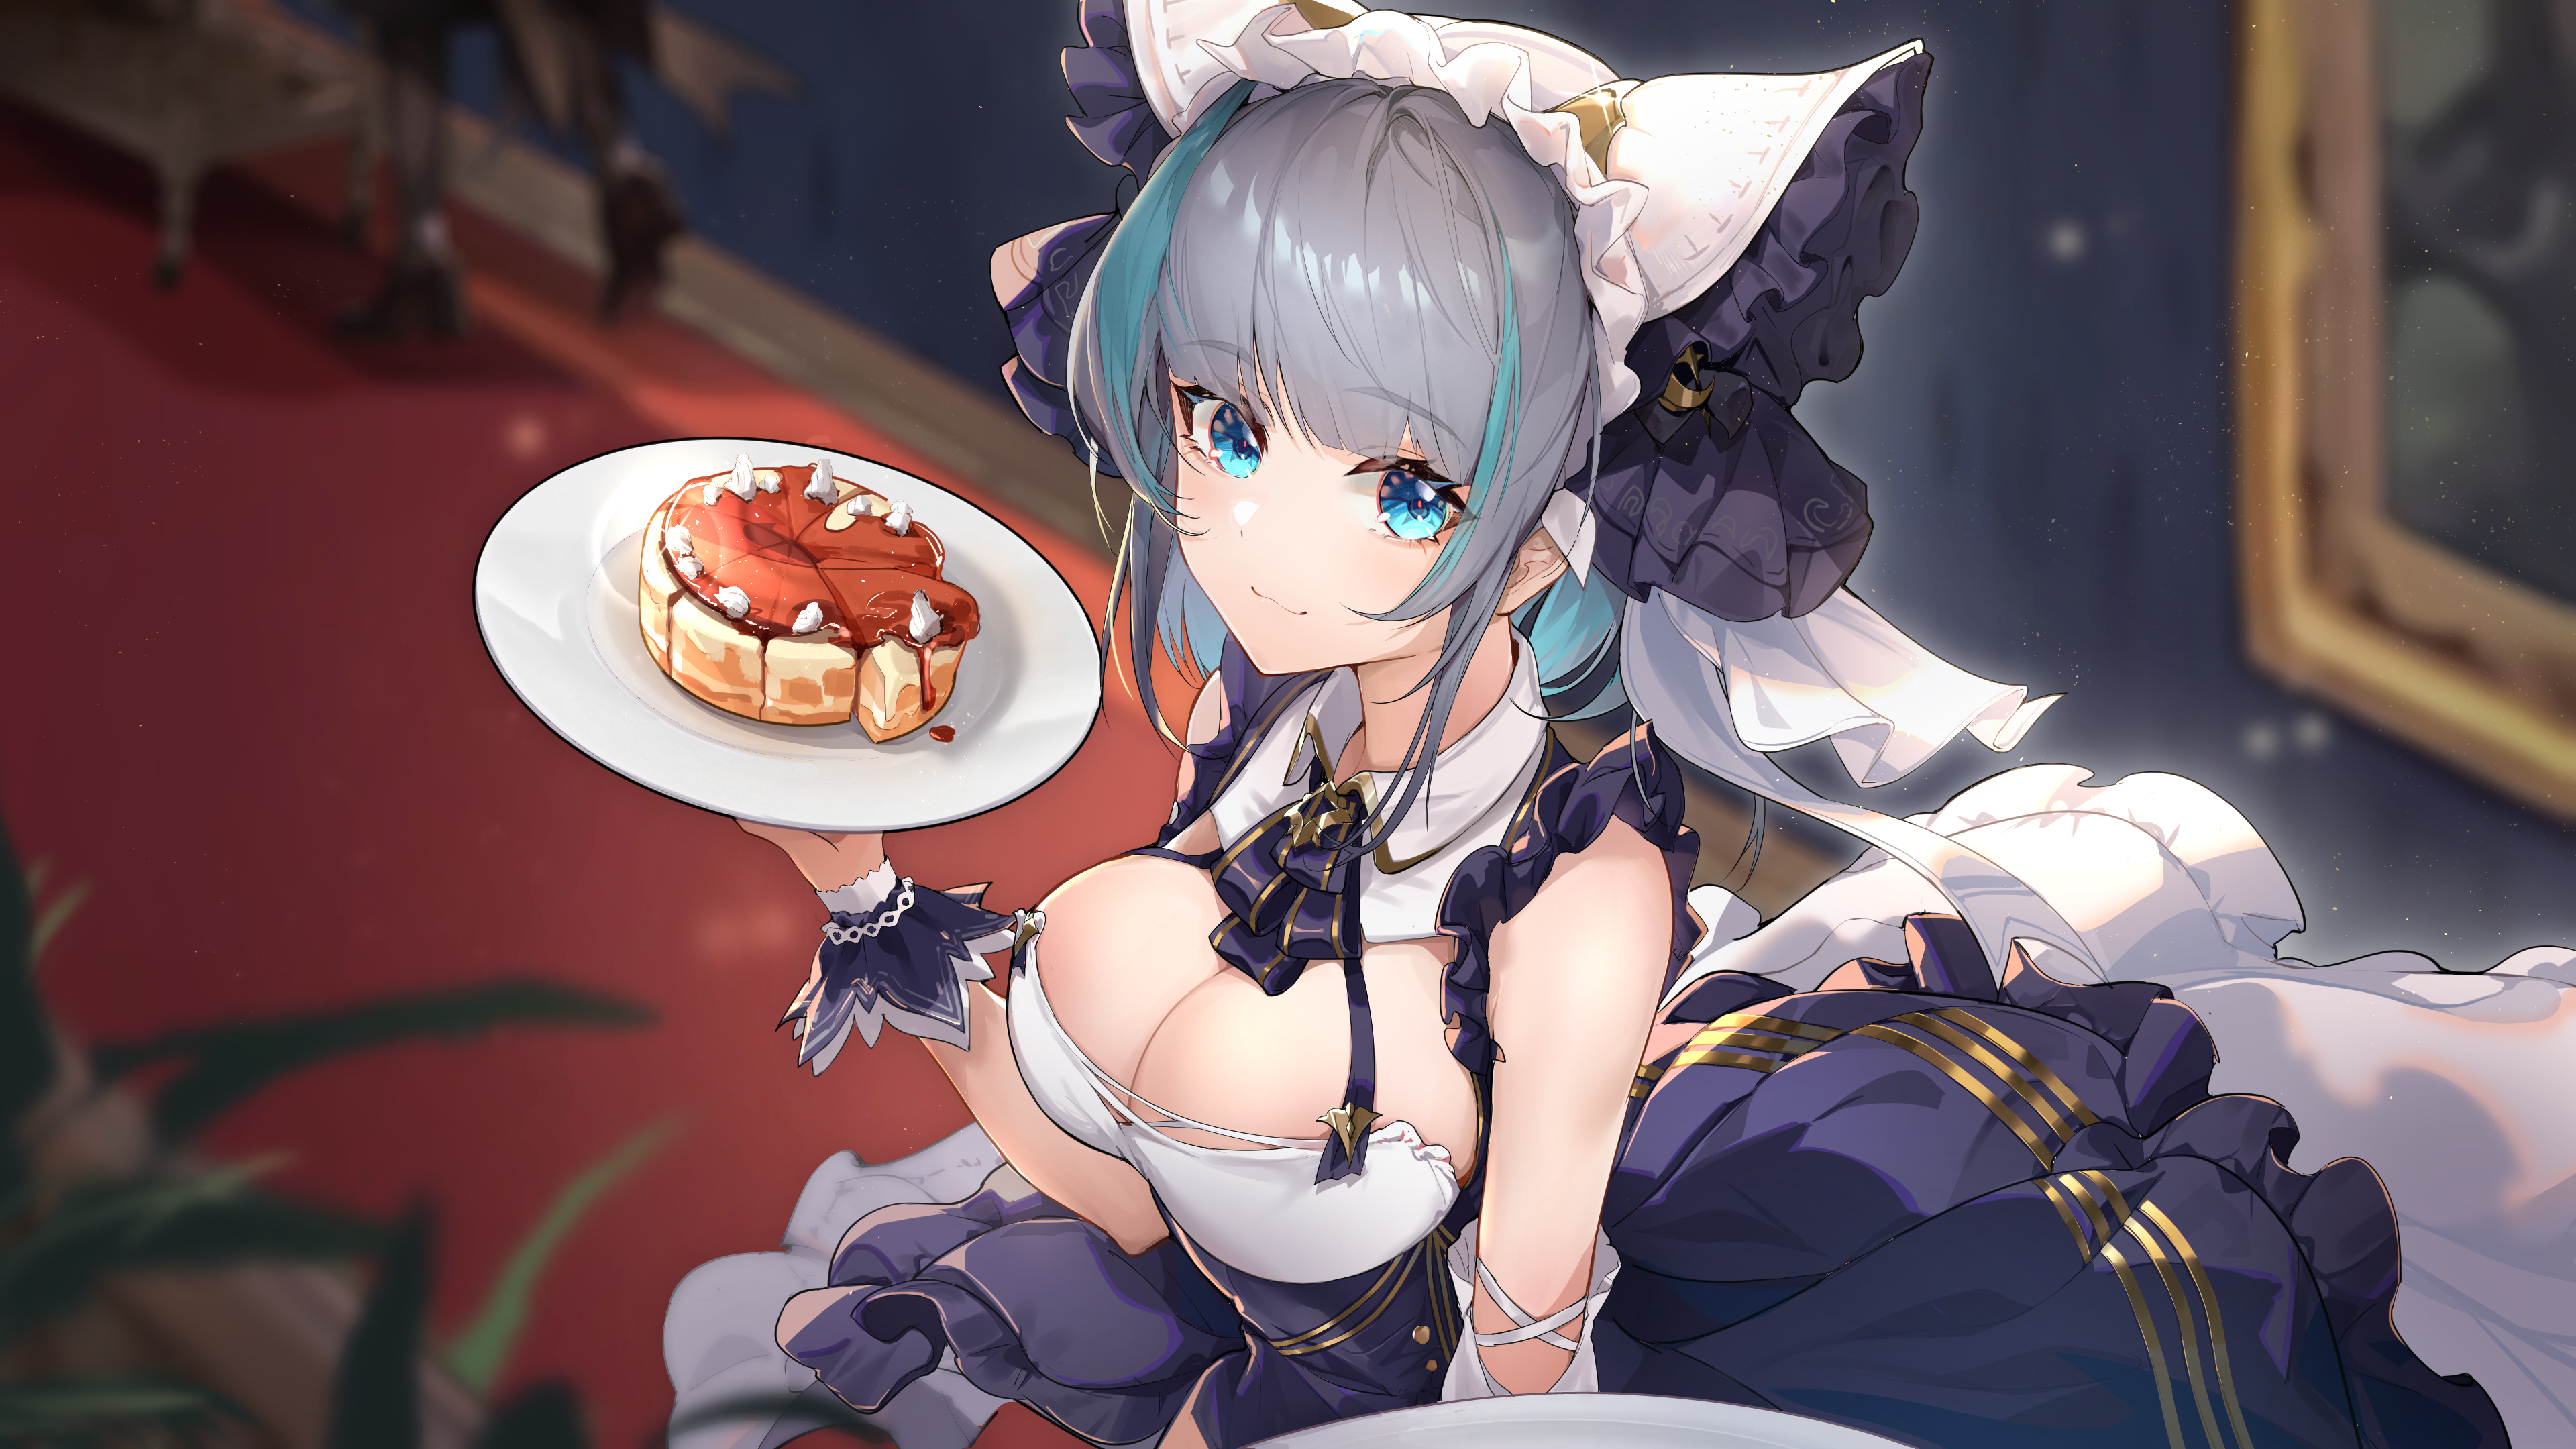 Anime 3840x2160 anime anime girls Cheshire (Azur Lane) Azur Lane cat ears cat girl blue eyes sweets cleavage big boobs maid outfit maid two tone hair